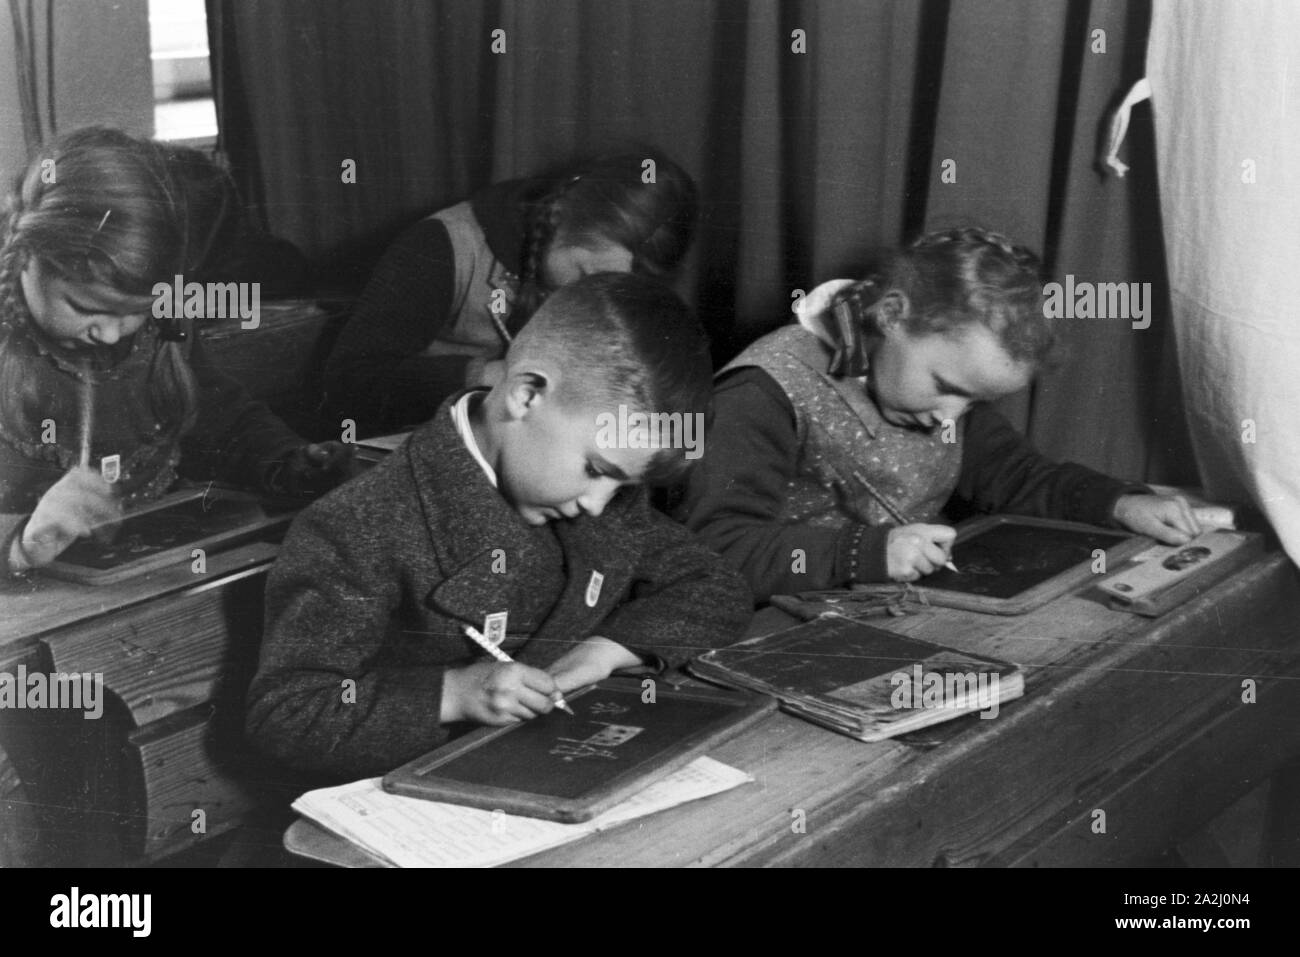 Childs blackboard Black and White Stock Photos & Images - Alamy